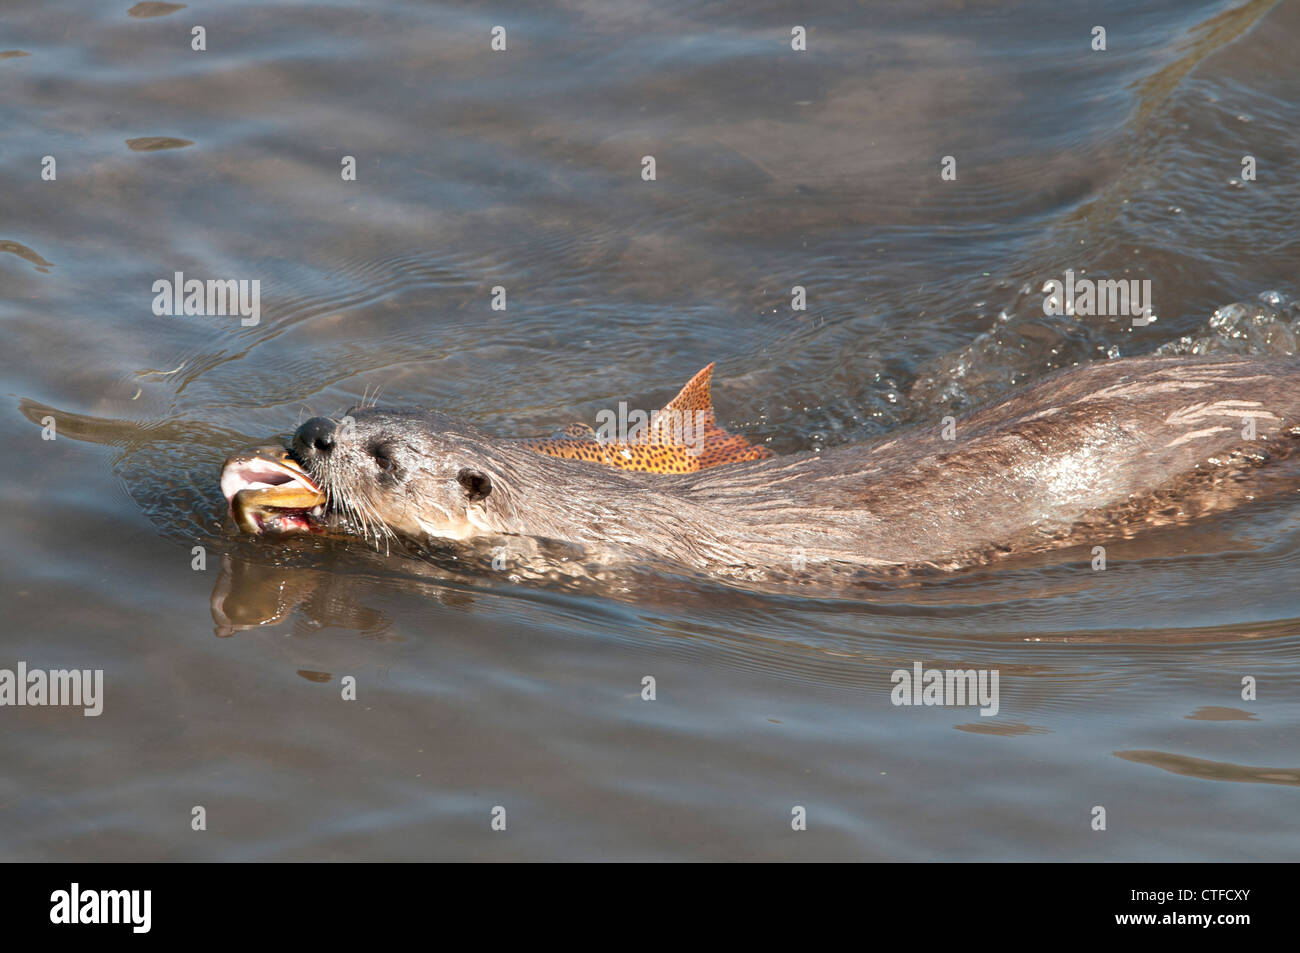 Stock photo of a north american river otter swimming with a trout. Stock Photo